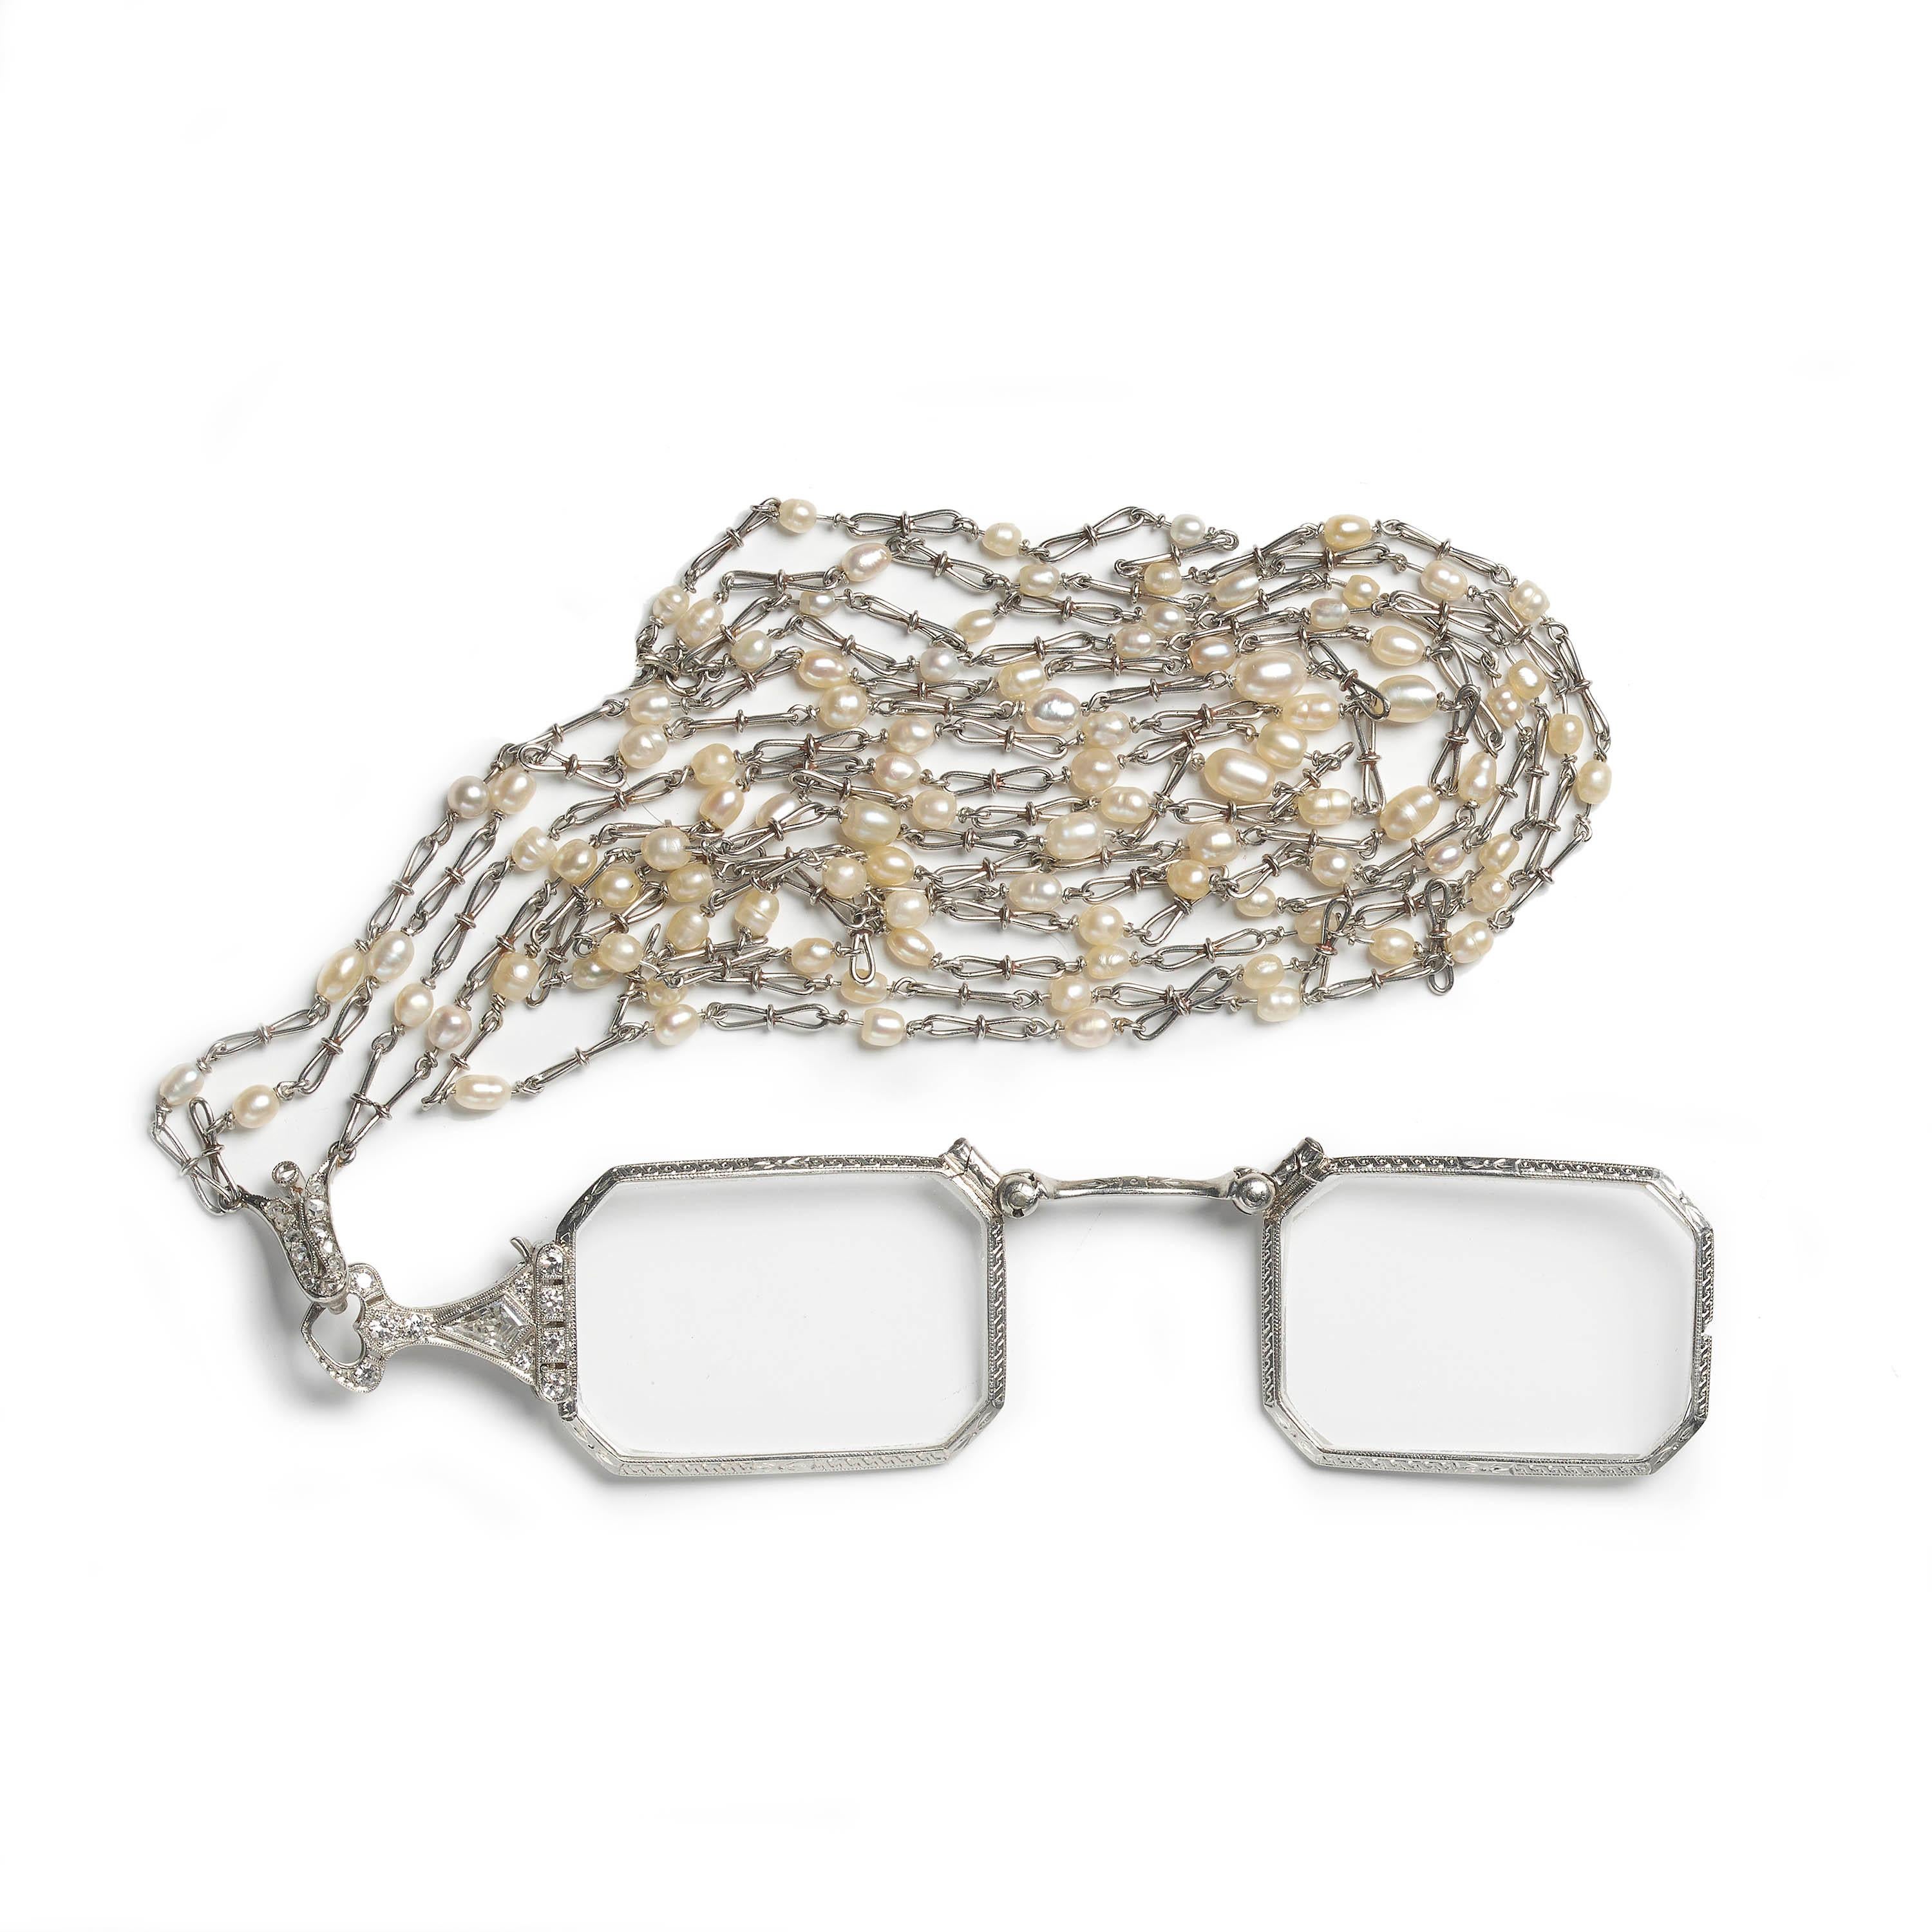 An Art Deco diamond set lorgnette, on a pearl and platinum double long chain, with cut corner rectangle lenses, in engraved and millegrain edged surrounds, with a handle set with a kite-shape diamond, surrounded by eight-cut and round brilliant-cut